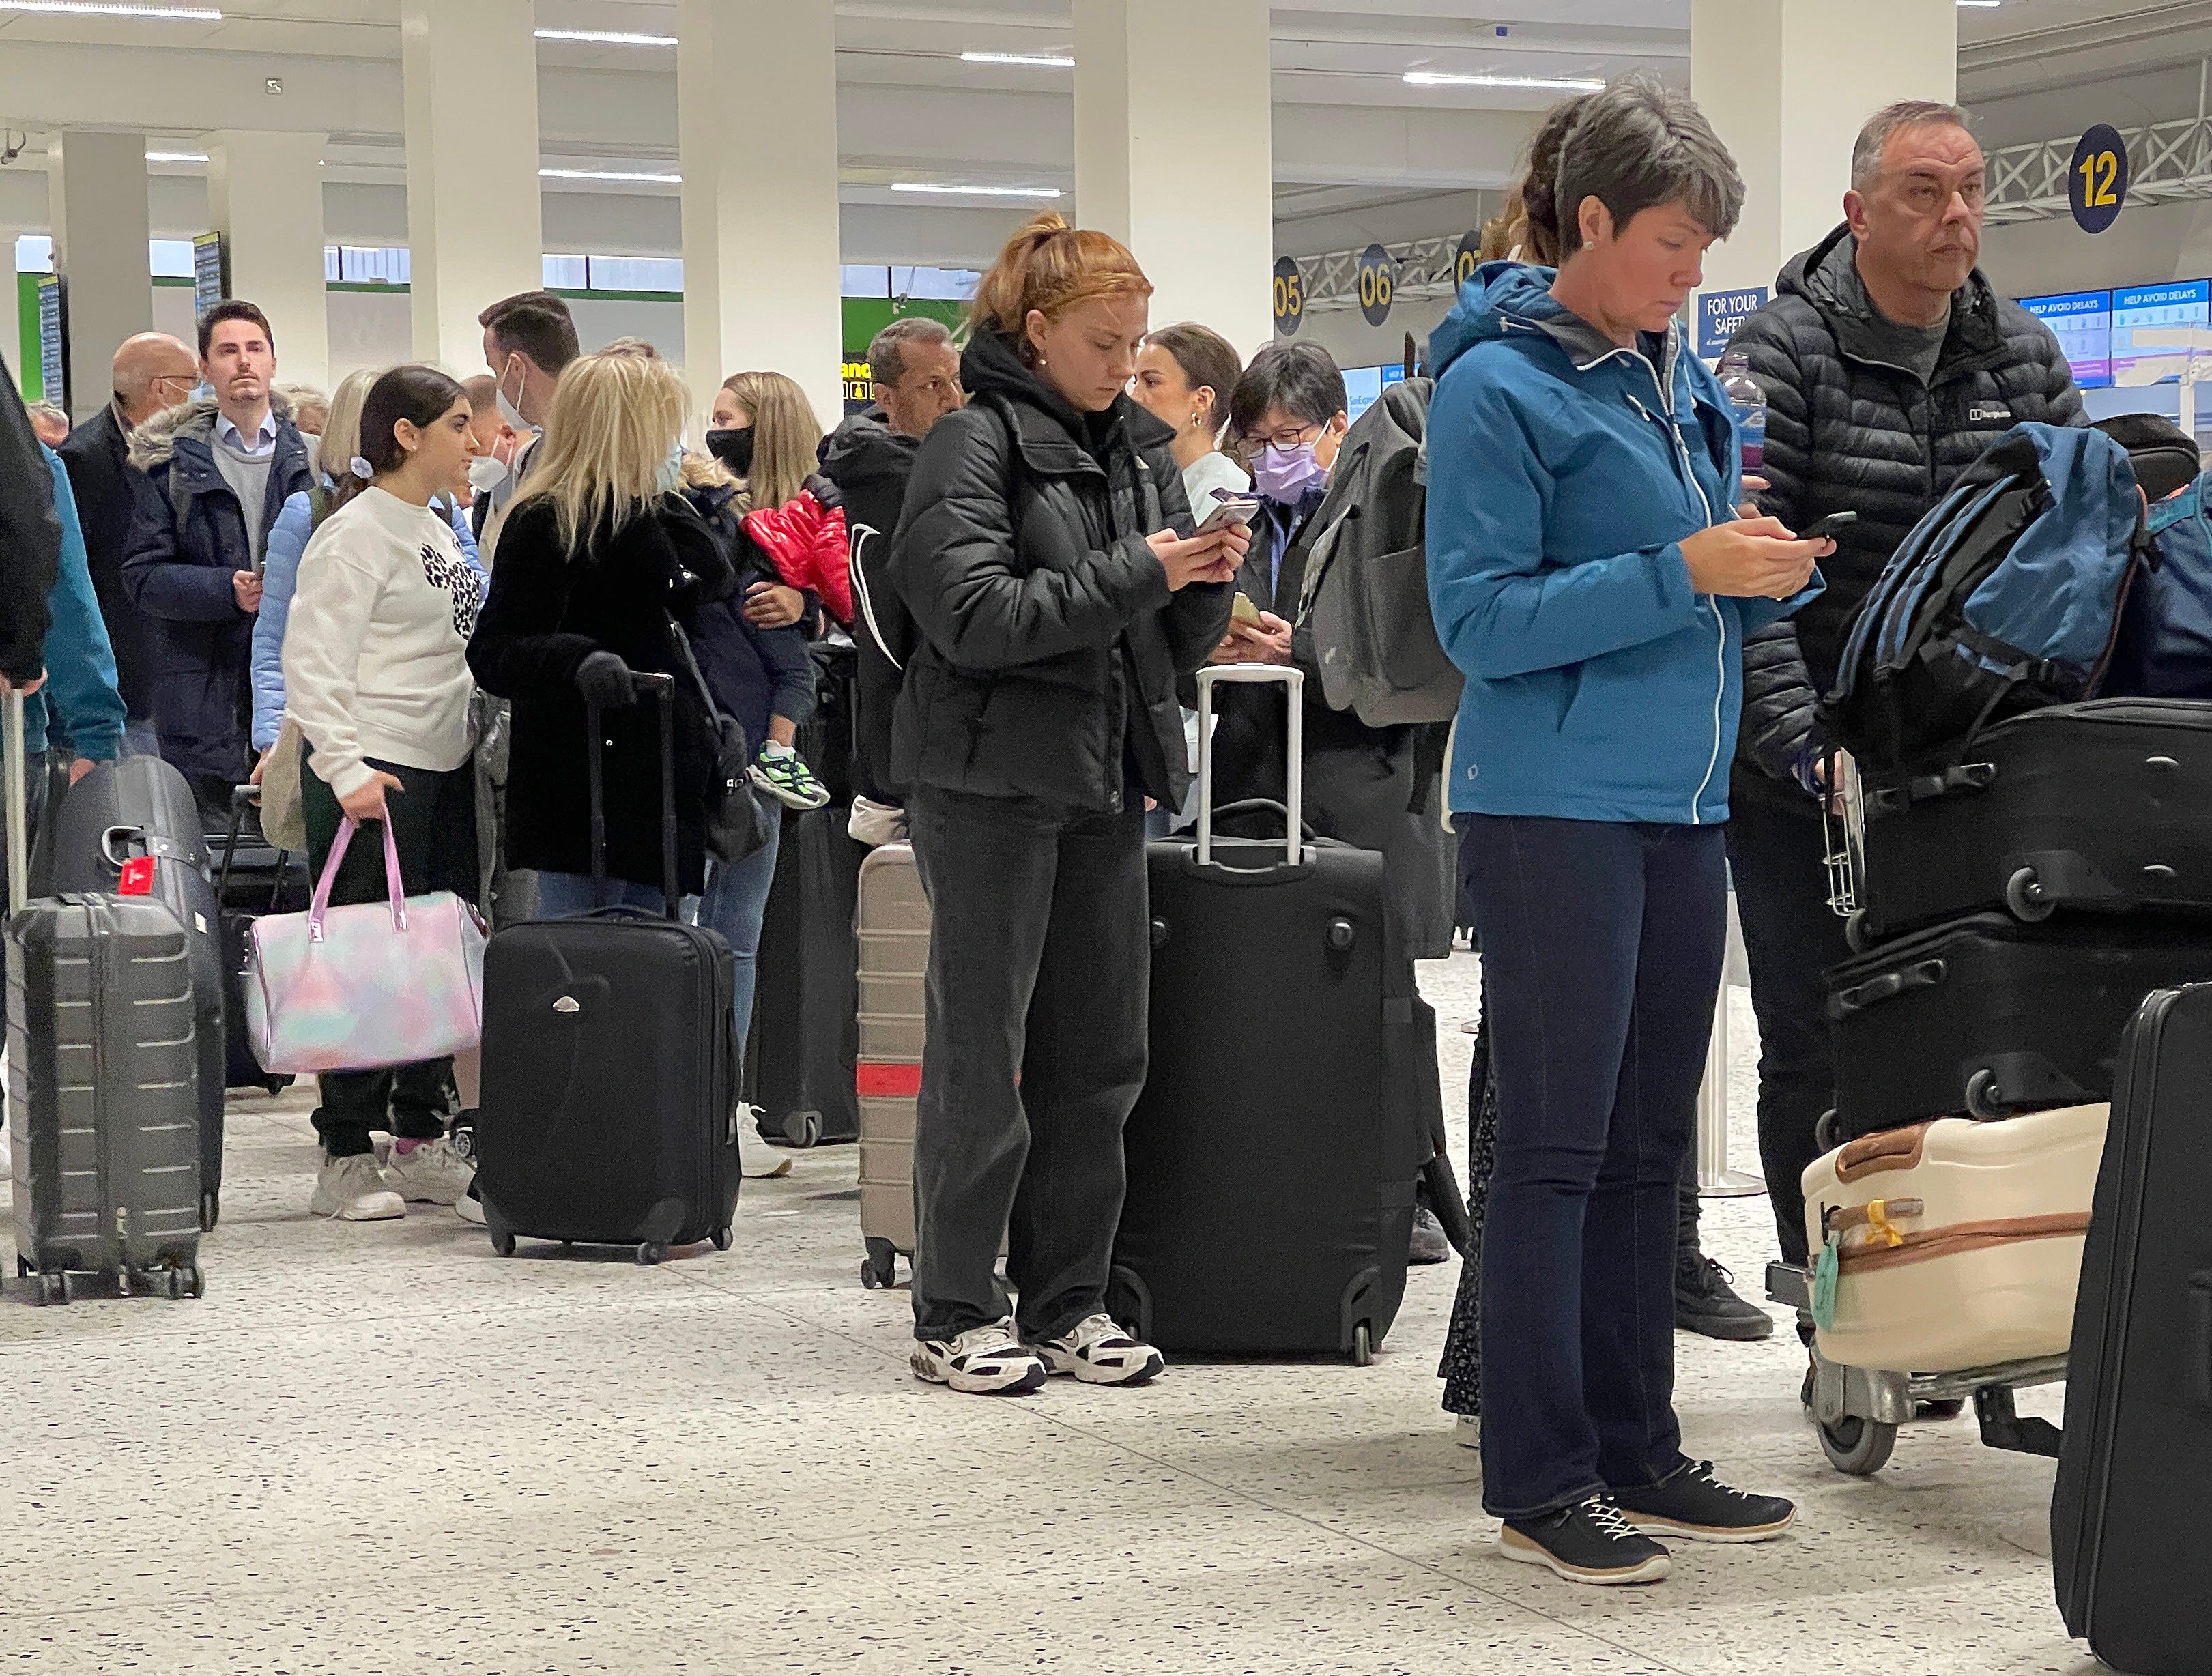 Passengers queue for check-in at Manchester airport's Terminal 1